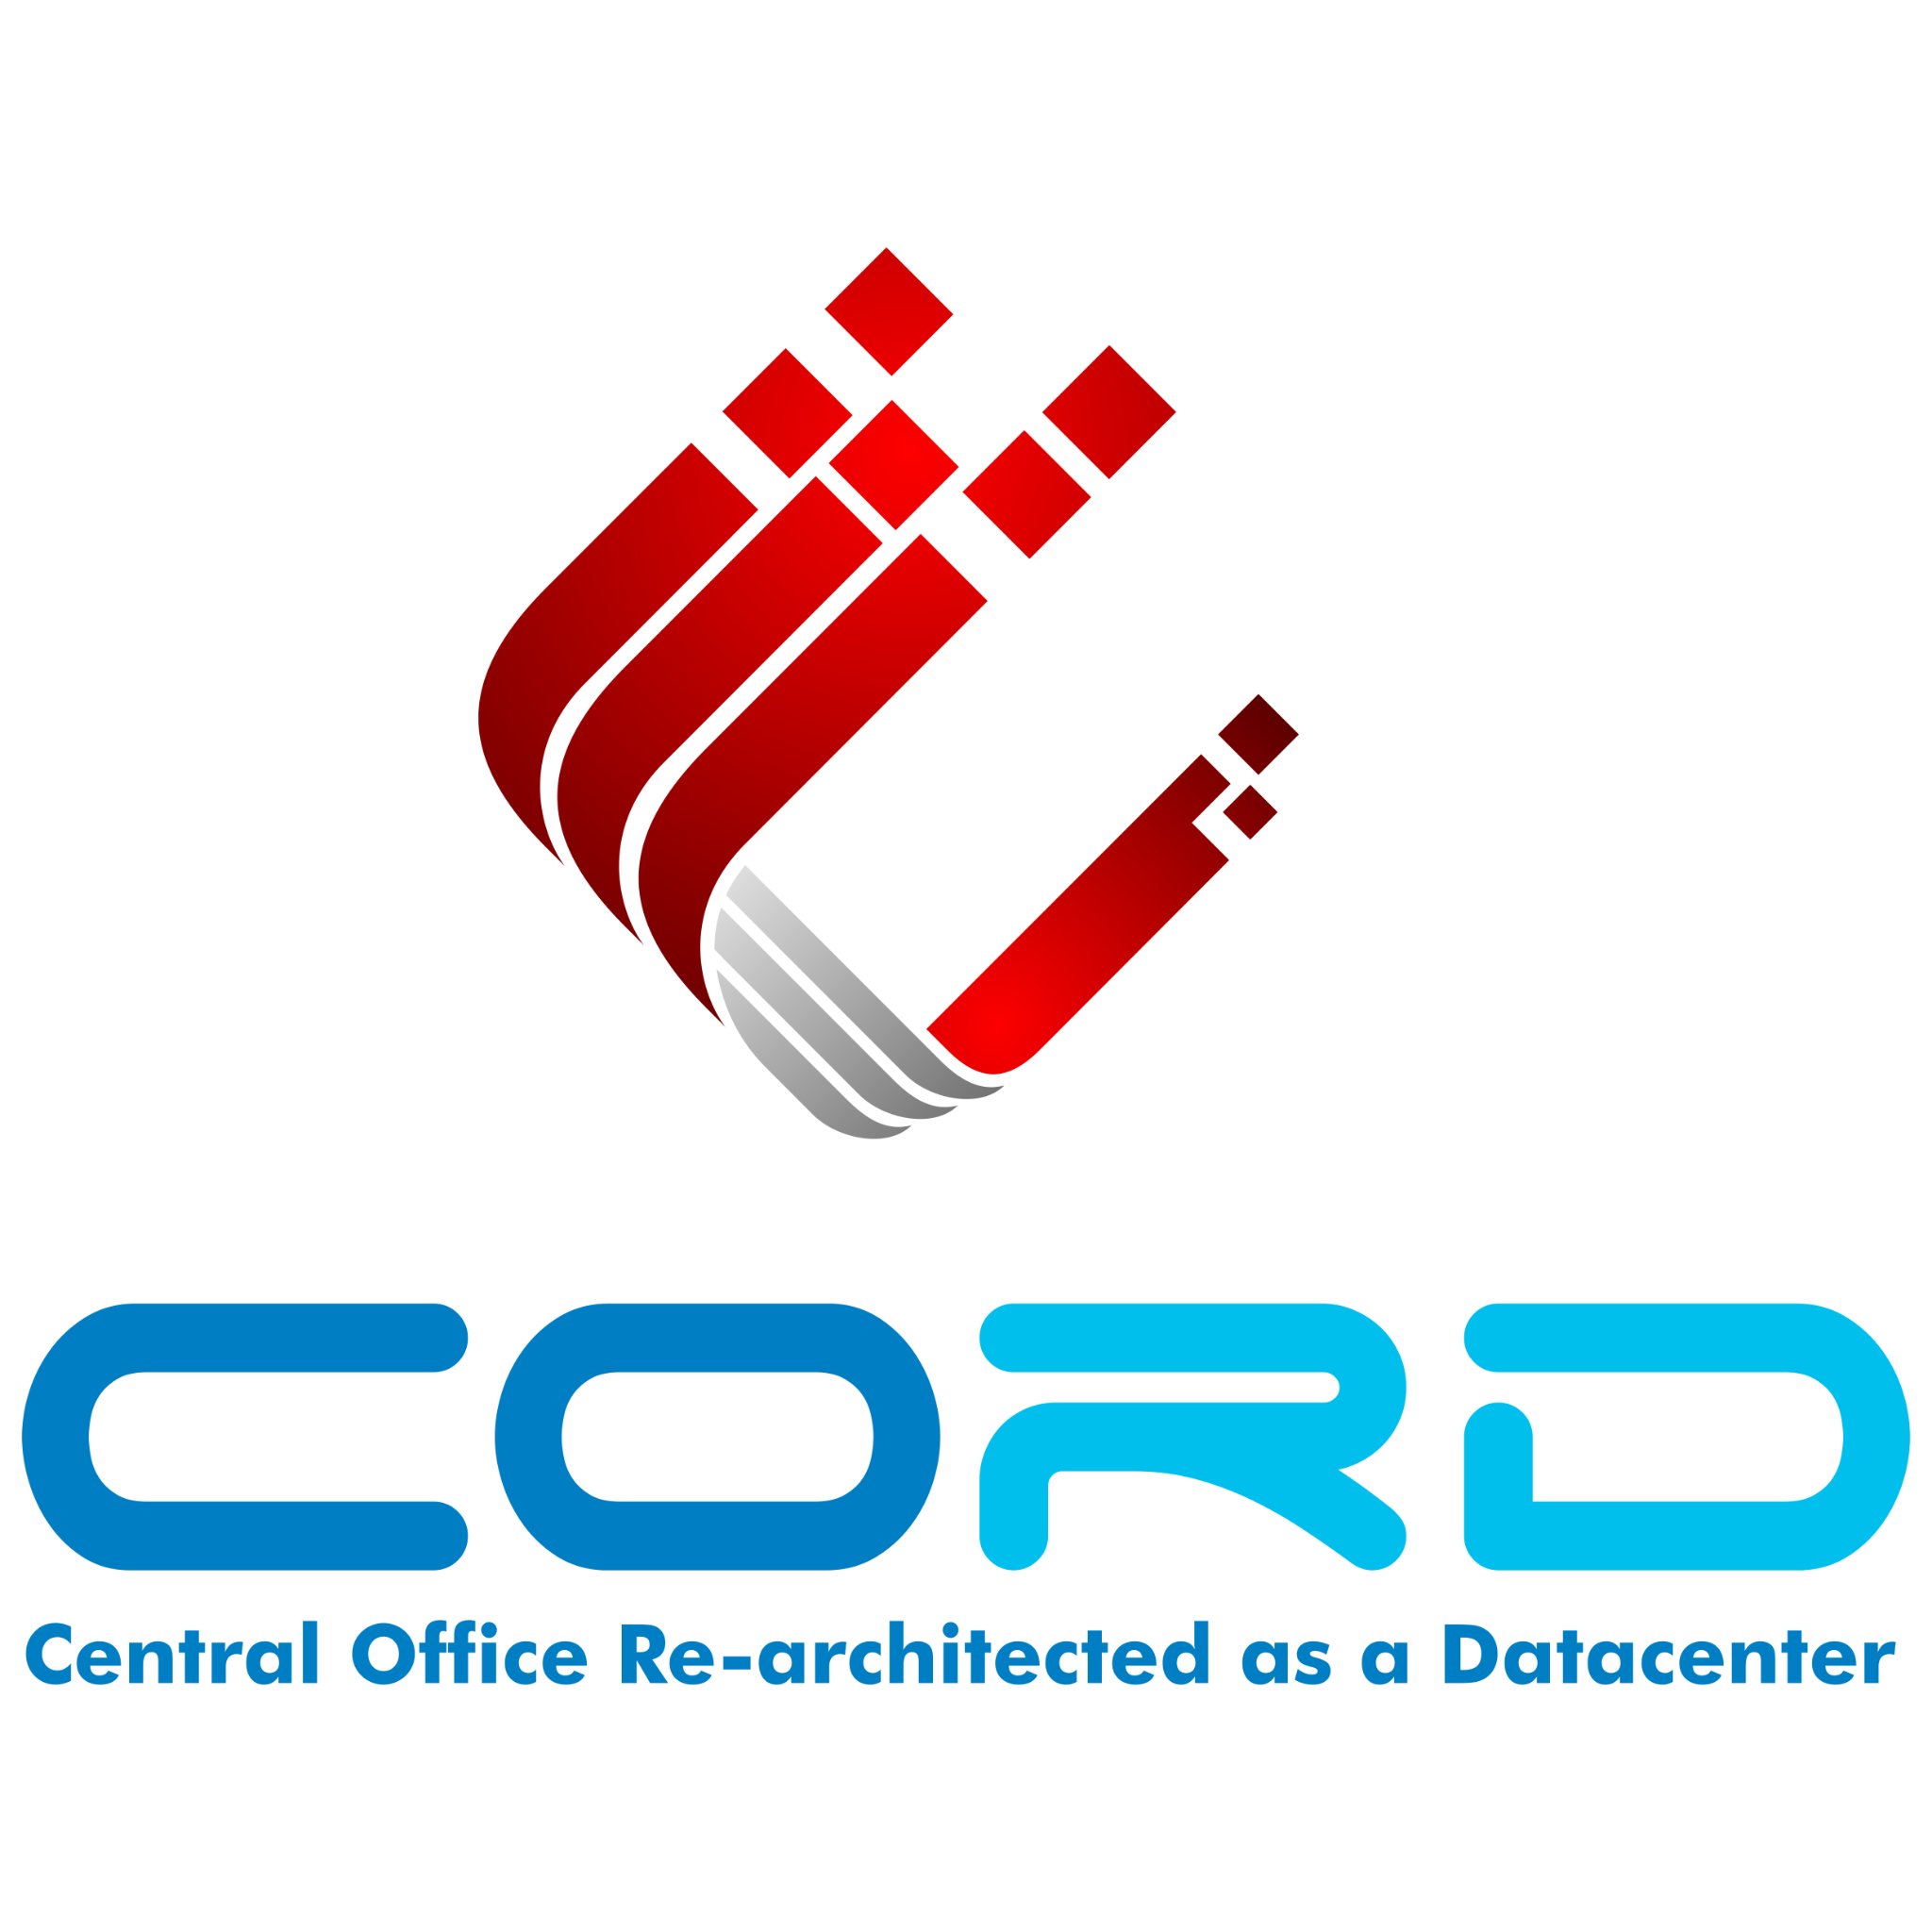 CORD® (Central Office Re-architected as a Datacenter) is an open source project bringing datacenter economics and cloud agility to the Telco Central Office.